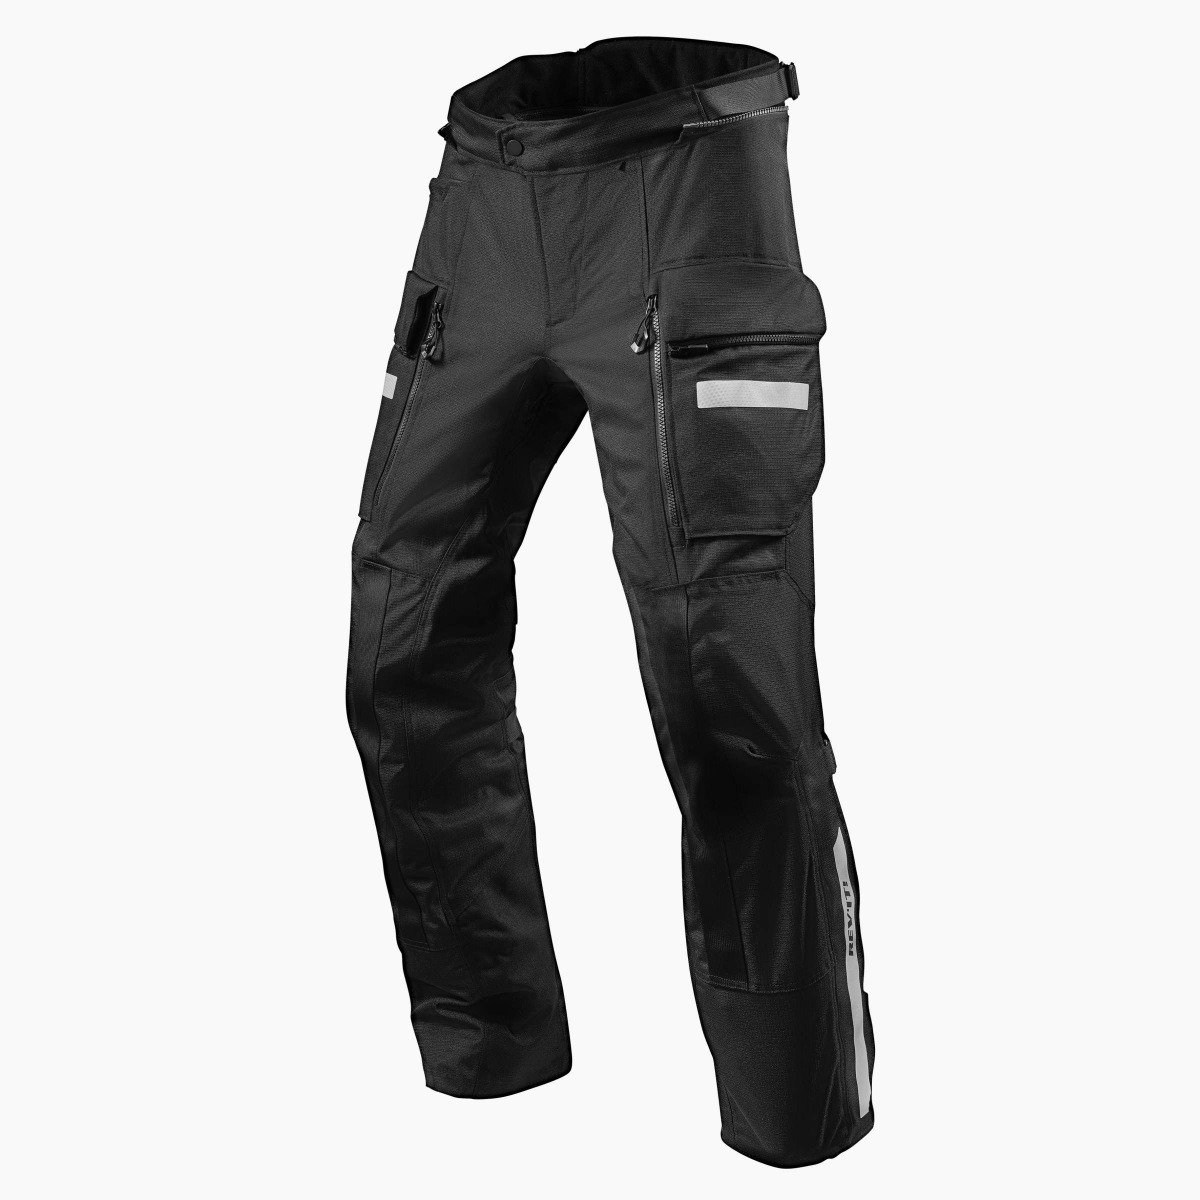 Image of REV'IT! Sand 4 H2O Standard Black Motorcycle Pants Size M ID 8700001316255